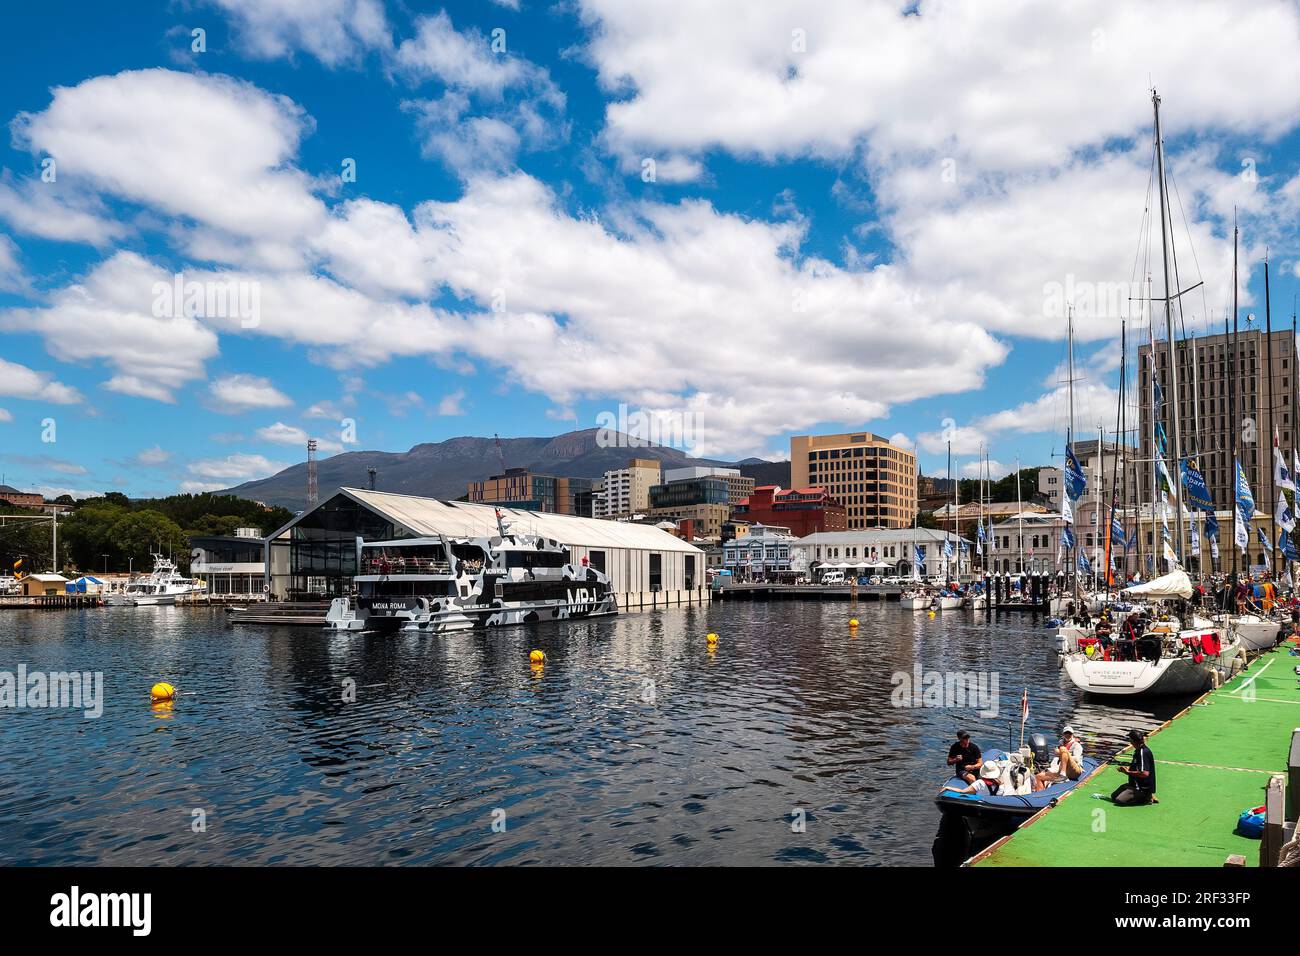 Elizabeth Street Pier at Hobart city, in Tasmania, Australia, Oceania. Hobart is the capital and most populous city of the island state of Tasmania. Stock Photo